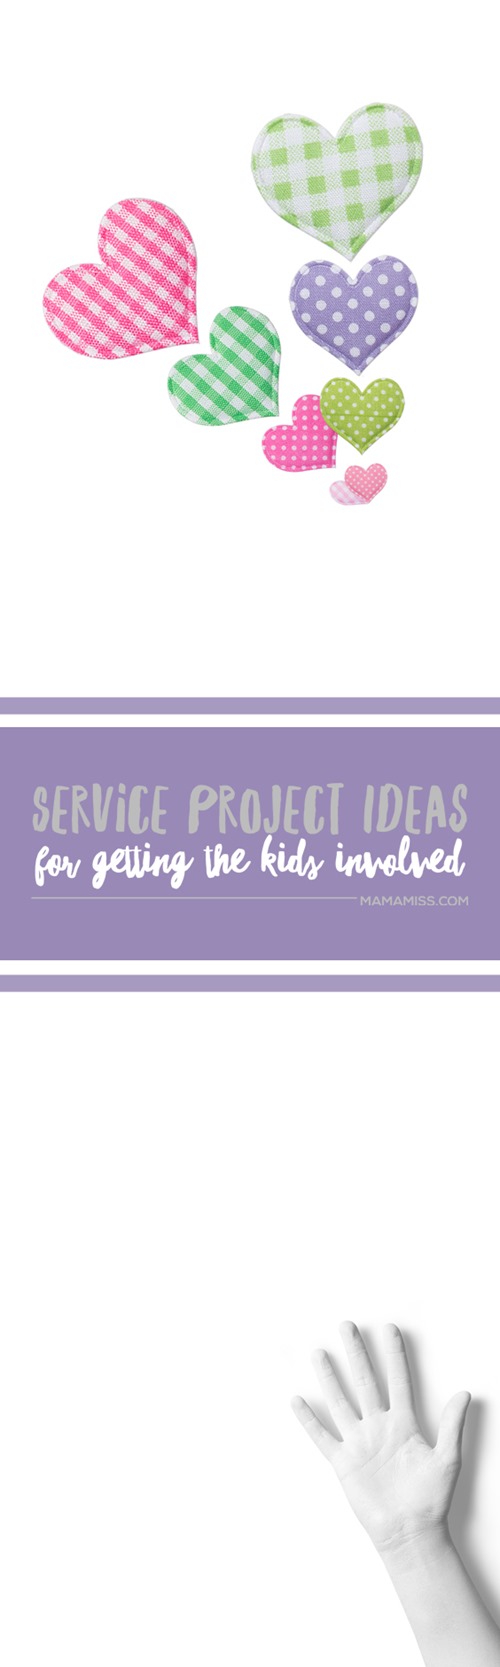 Great Service Project Ideas for Getting the Kids Involved - You have the ability to inspire your littles to make a difference in the lives of others. From @mamamissblog #serviceideasforkids